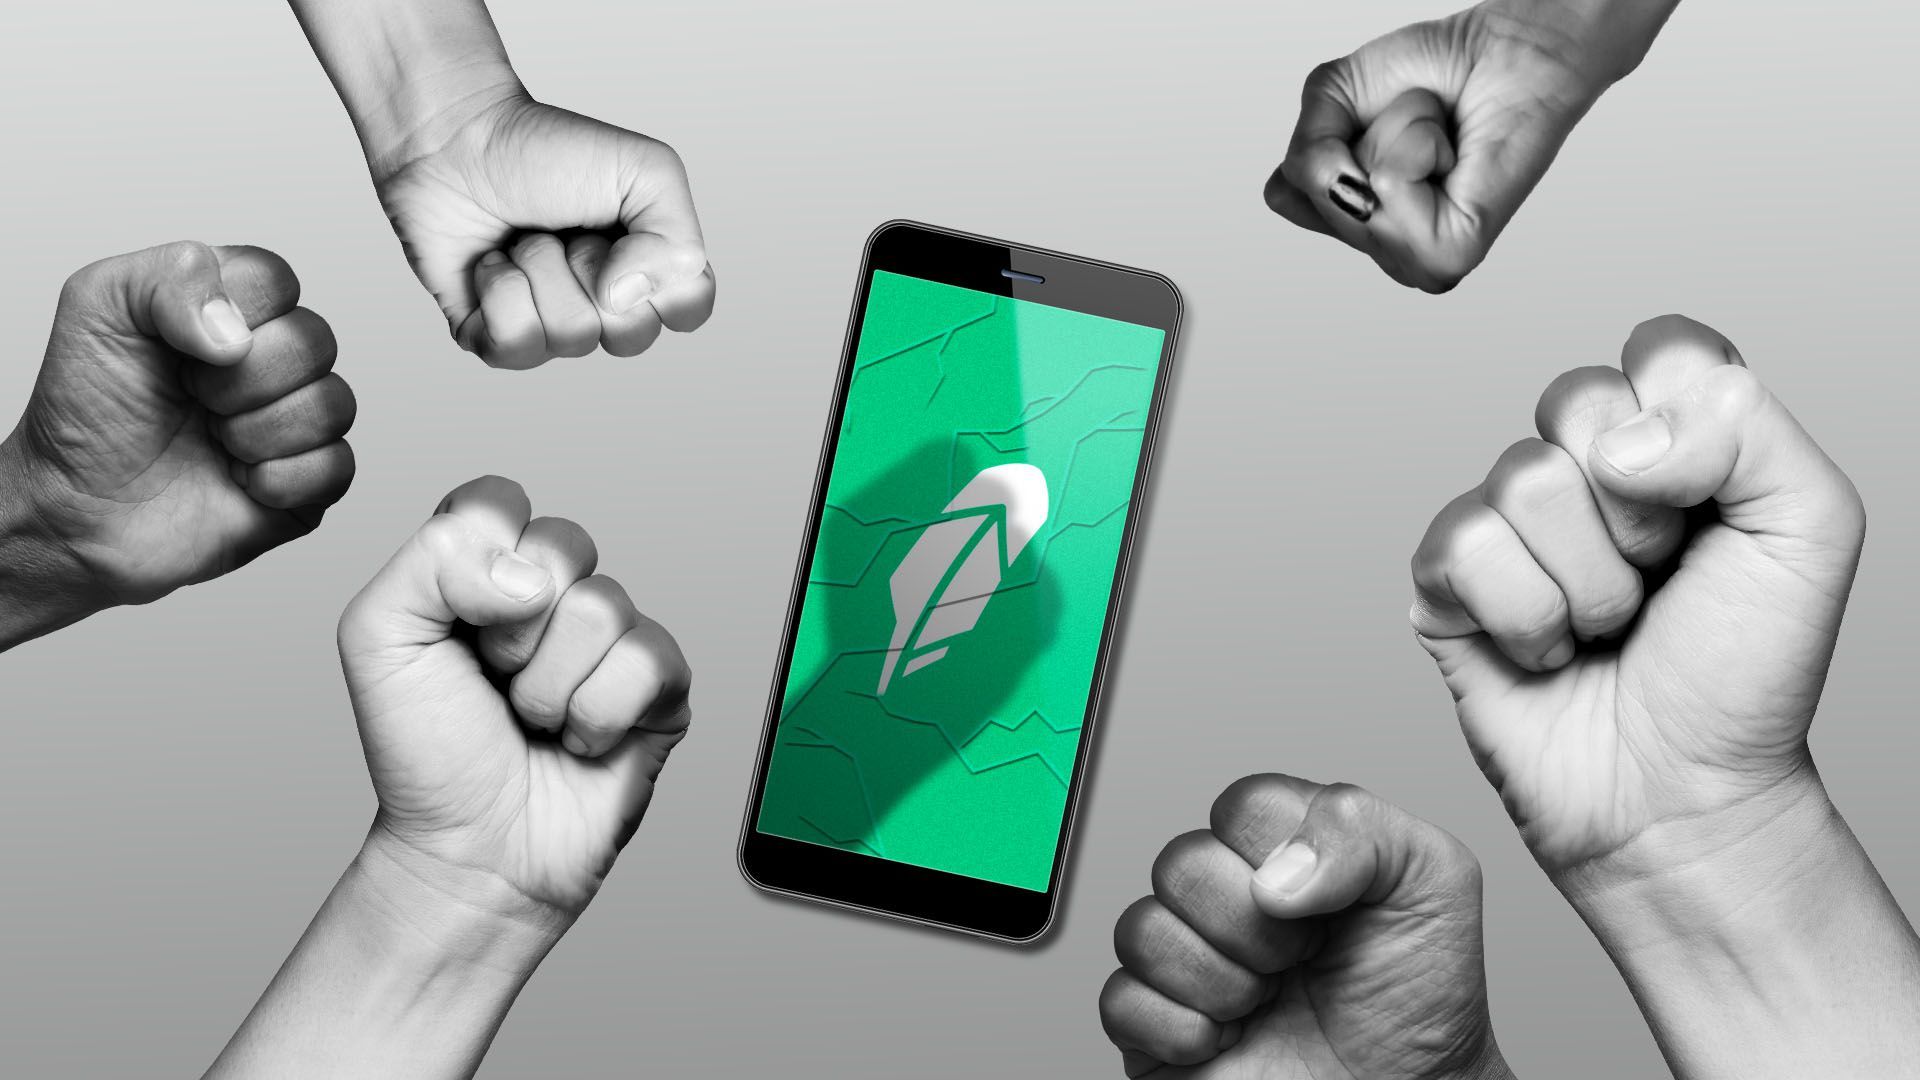 Illustration of a cracked cellphone screen featuring the Robinhood app, surrounded by angry fists